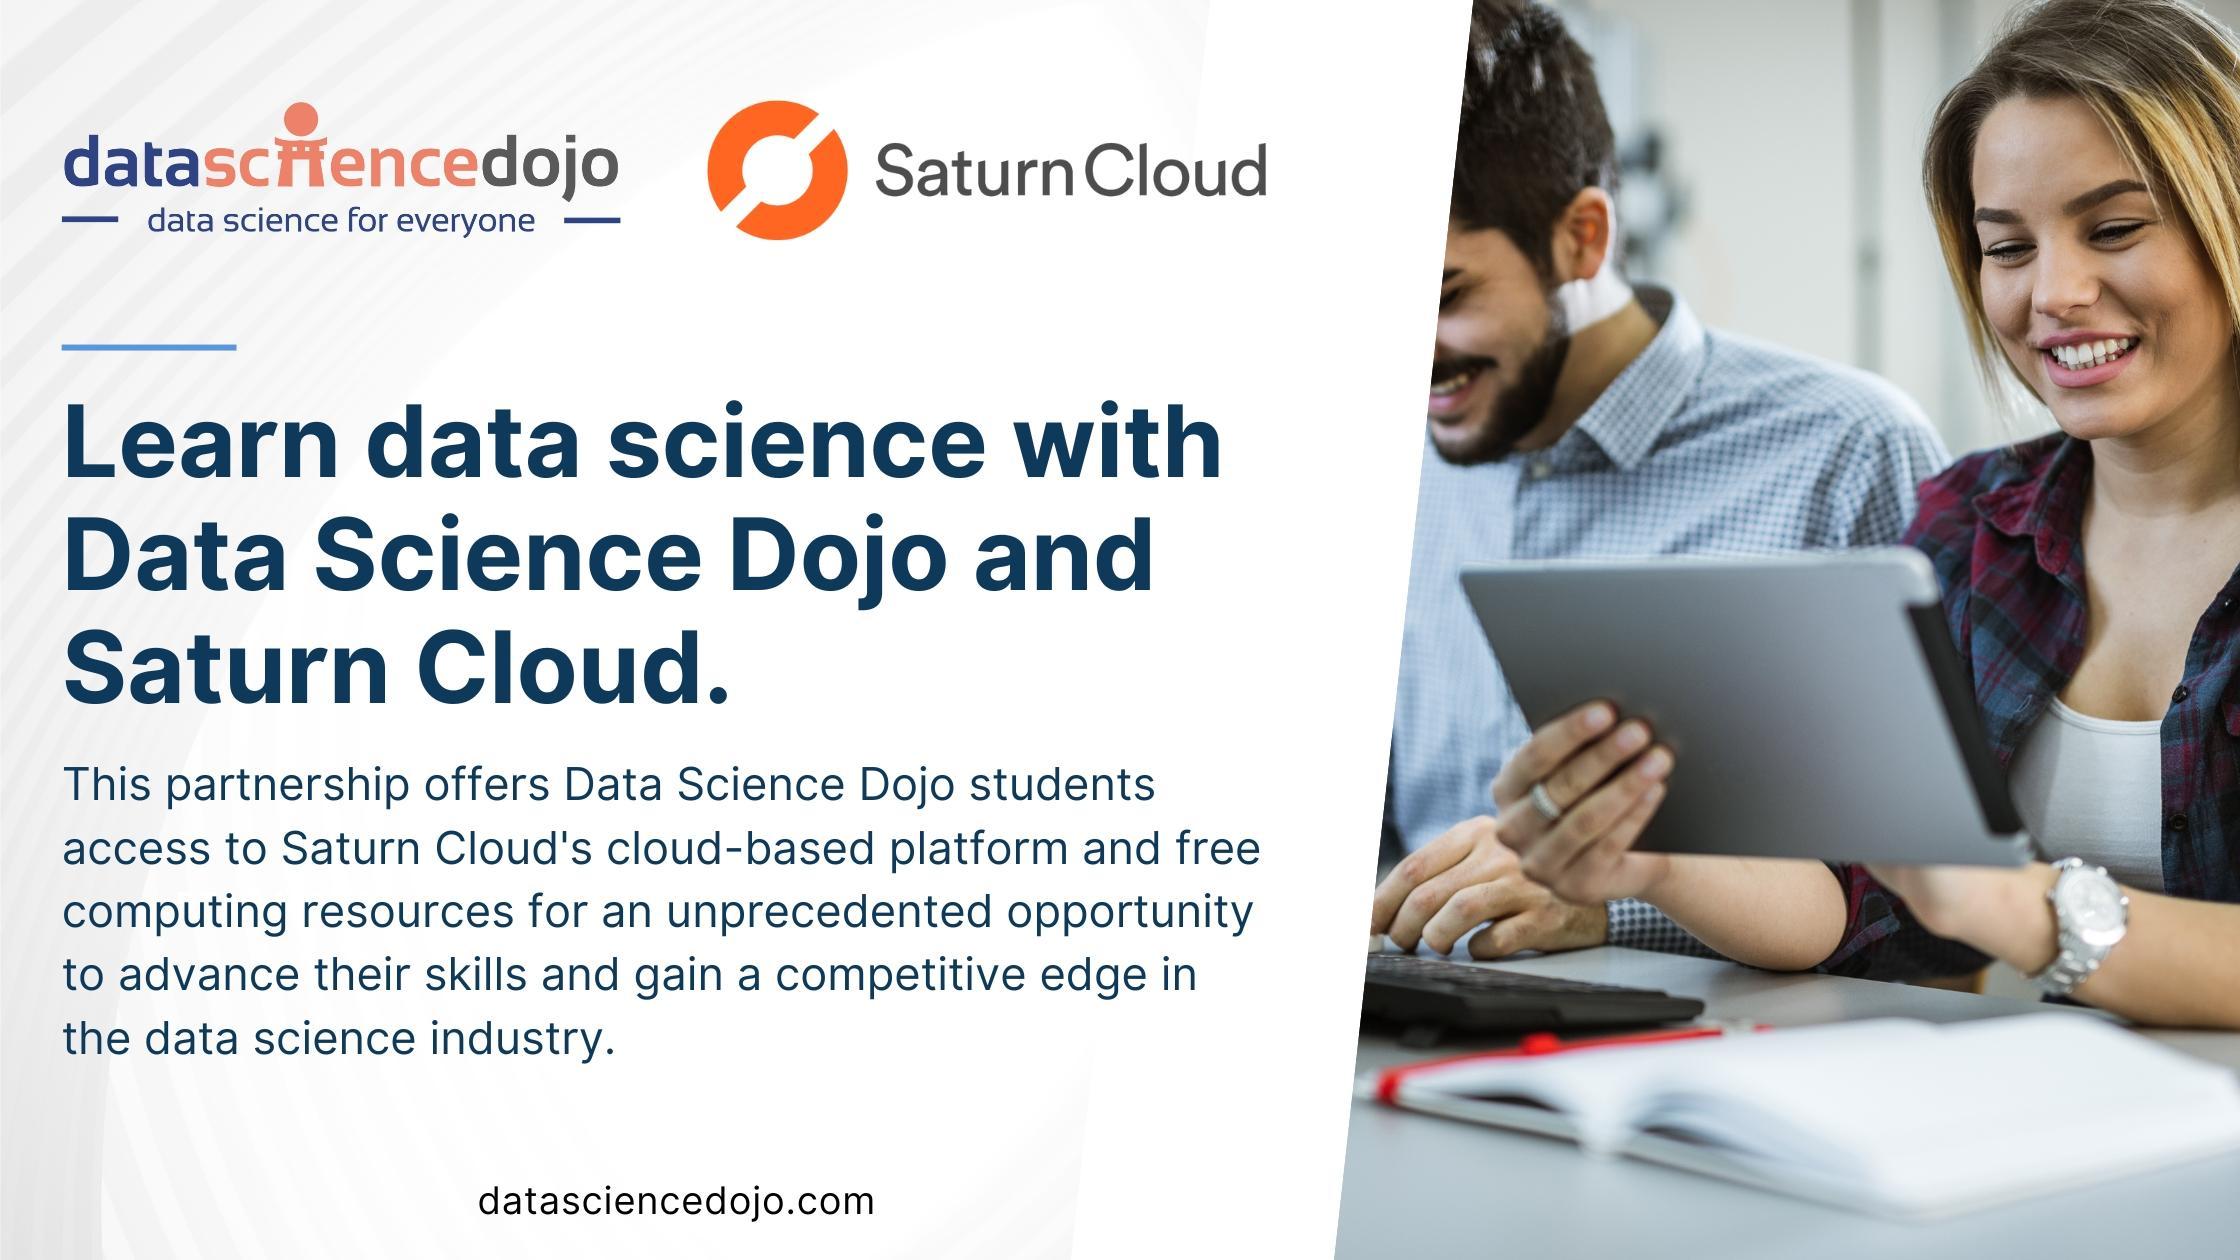 Learn data science with Data Science Dojo and Saturn Cloud 